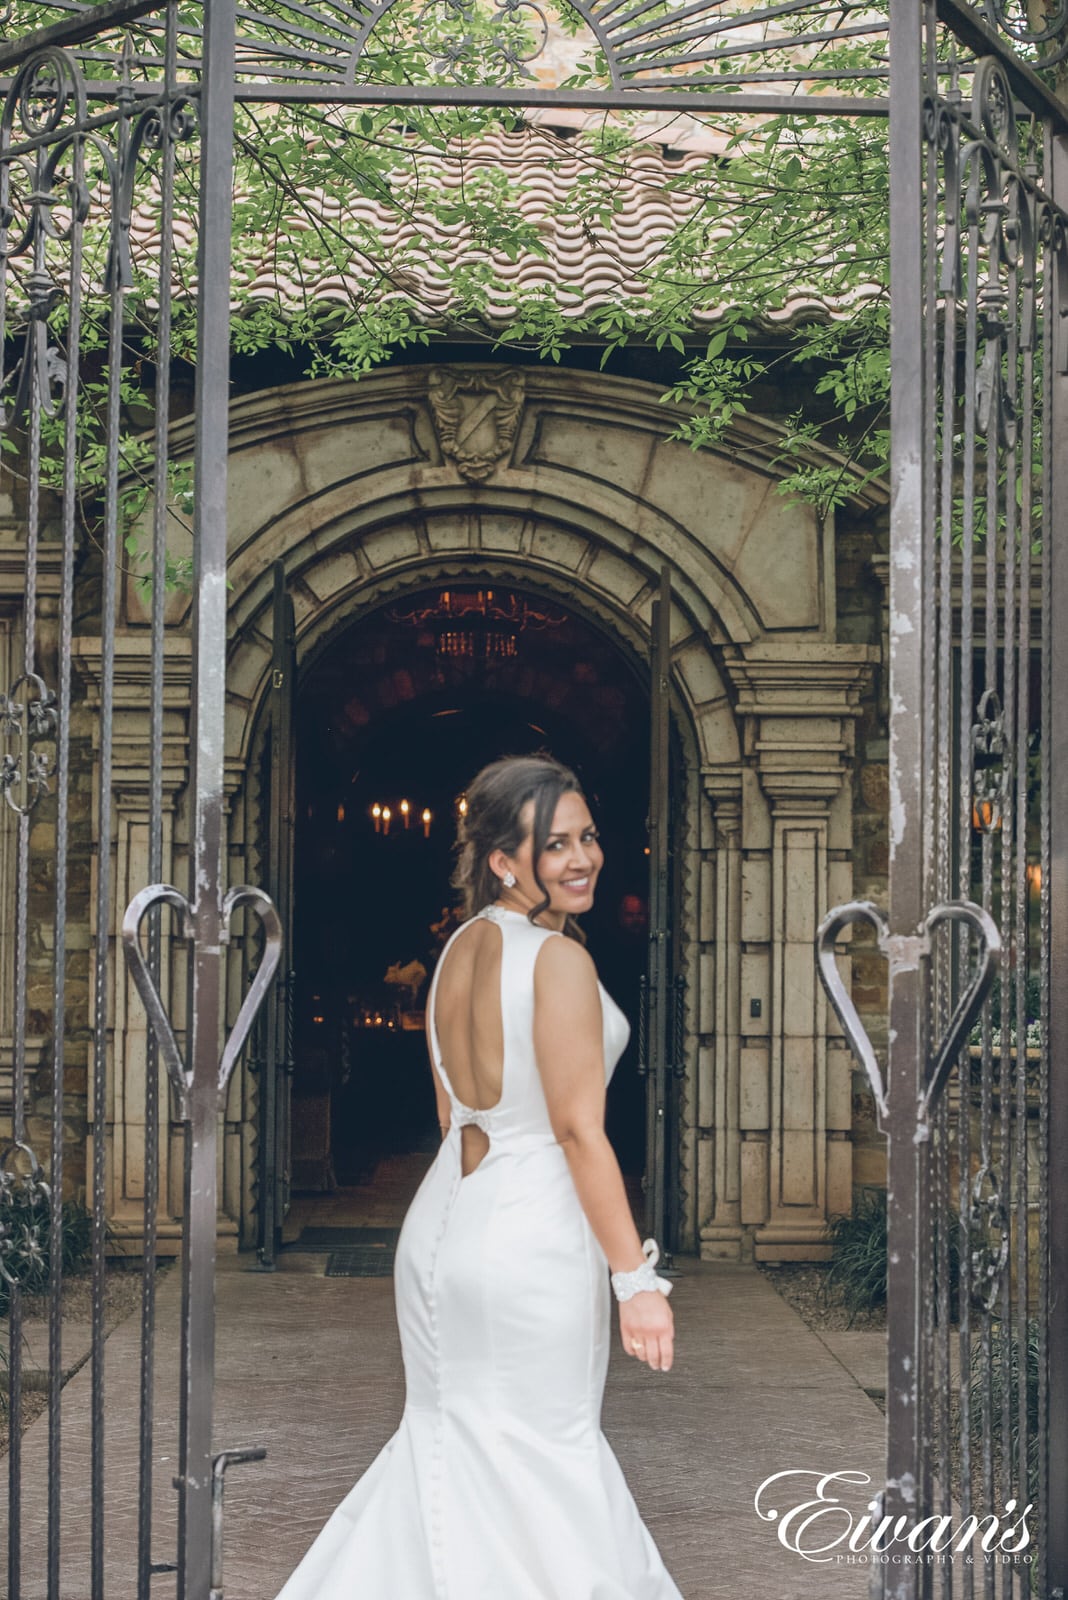 woman in a white dress standing in between open gates